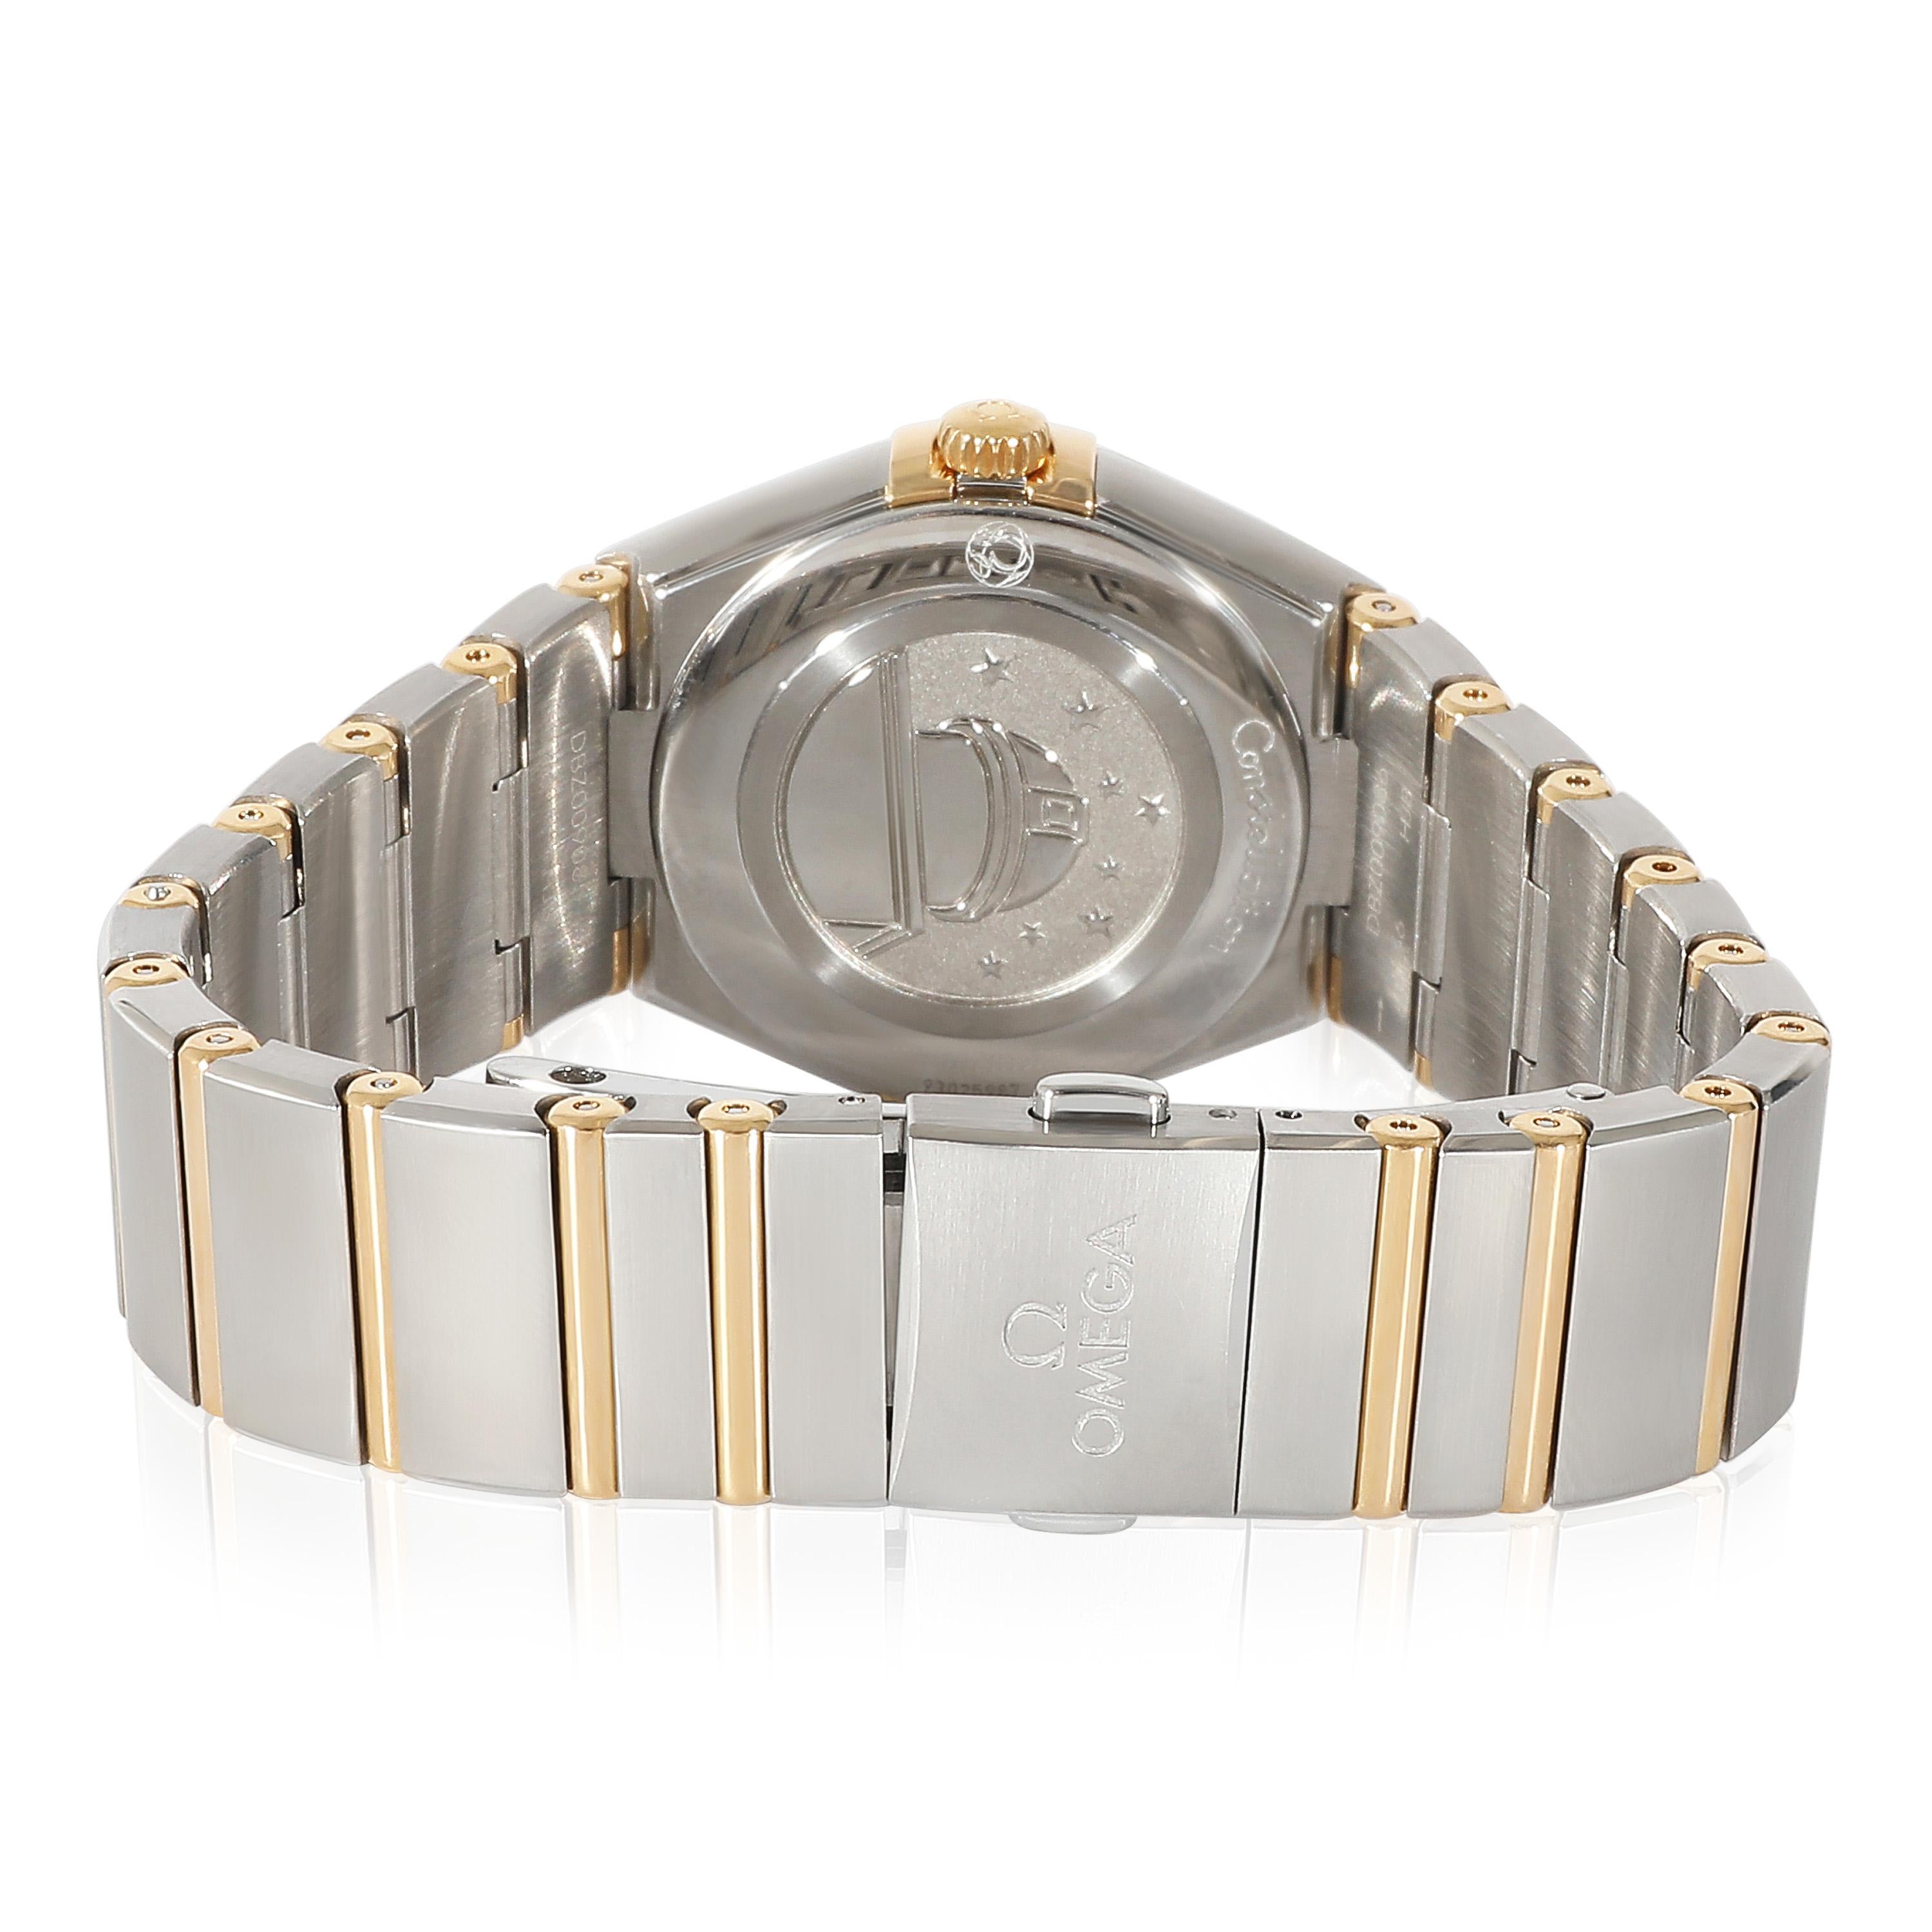 Omega Constellation 131.20.28.60.05.002 Women's Watch in 18k Stainless Steel/Yel

SKU: 132828

PRIMARY DETAILS
Brand: Omega
Model: Constellation
Country of Origin: Switzerland
Movement Type: Quartz: Battery
Year Manufactured: 2020
Year of